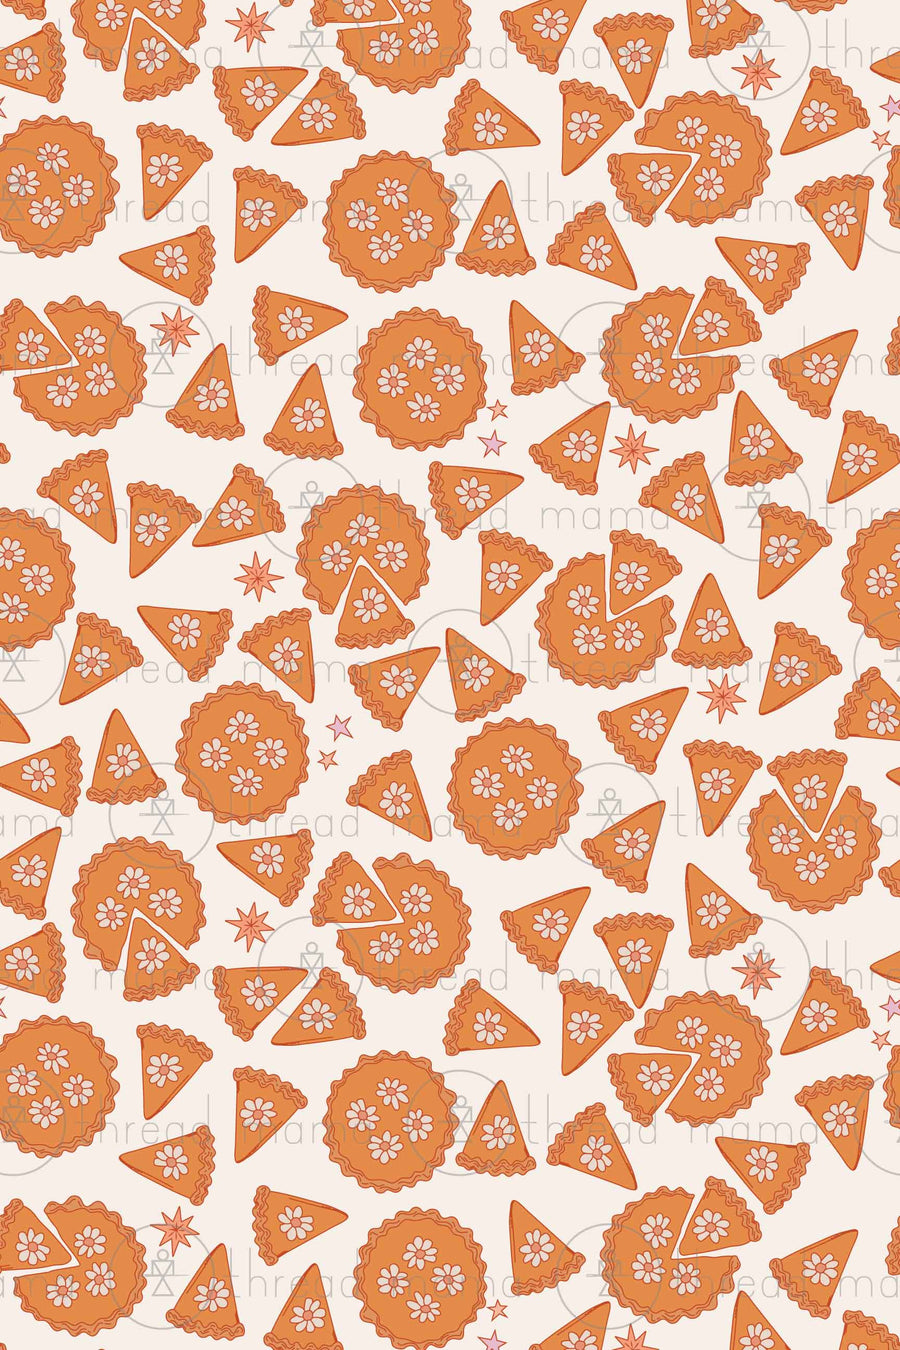 Repeating Pattern 146A (Seamless)